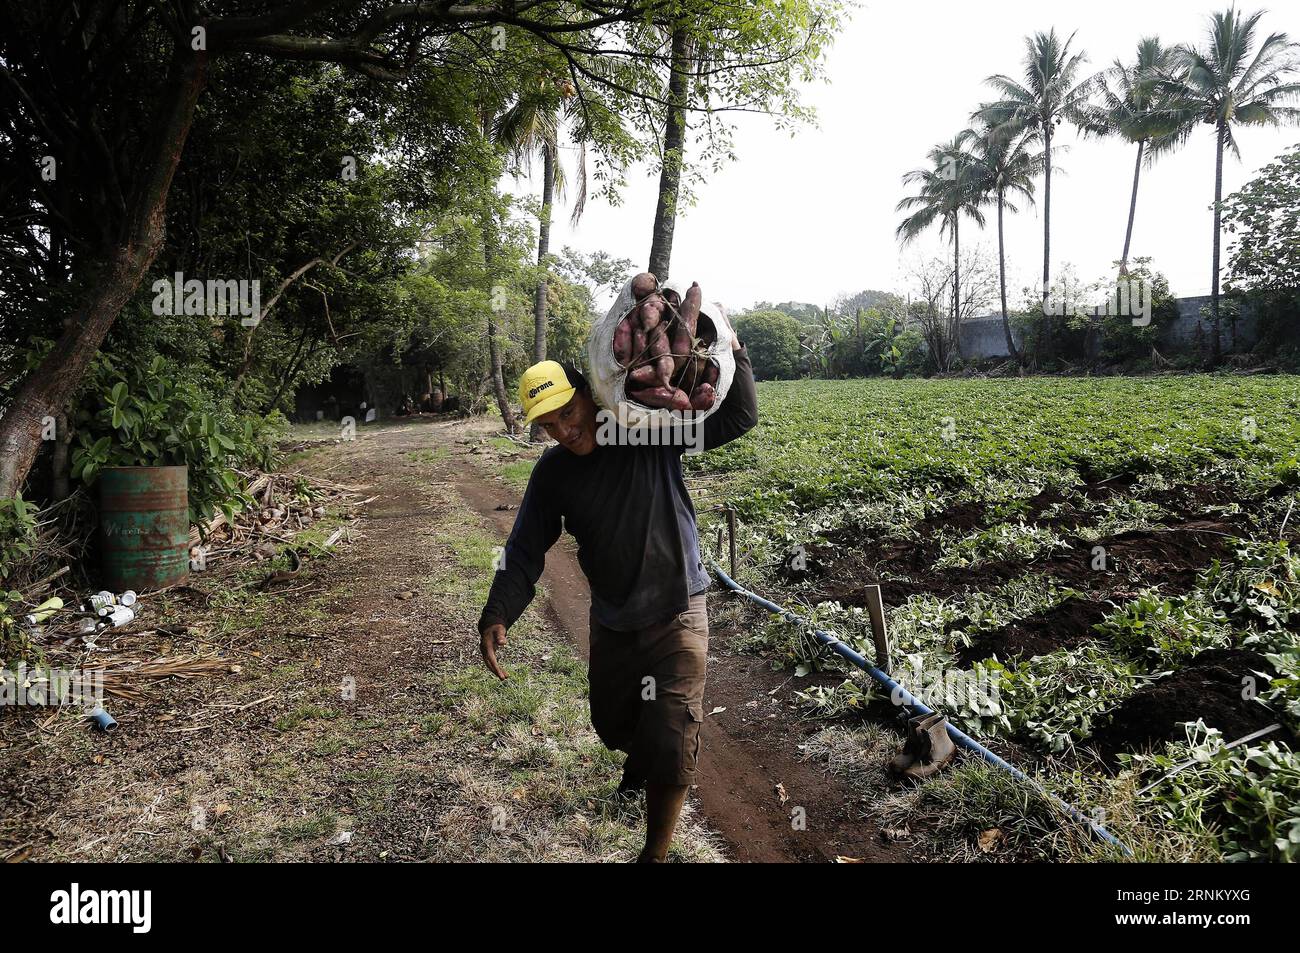 (170427) -- ALAJUELA, April 27, 2017 -- A farmer harvests sweet potatoes near the Poas Volcano, in Alajuela Province, Costa Rica, on April 26, 2017. According to local press, Costa Rica s President Luis Guillermo Solis called people on Monday to support the stores, farmers and tourism in the zones close to the Poas volcano. Costa Rica s National System of Conservation Areas announced that the Poas Volcano National Park will remain closed for undefined time, because the activity of the volcano has increased. ) (fnc) (gj) COSTA RICA-ALAJUELA-VOLCANO KENTxGILBERT PUBLICATIONxNOTxINxCHN   Alajuela Stock Photo